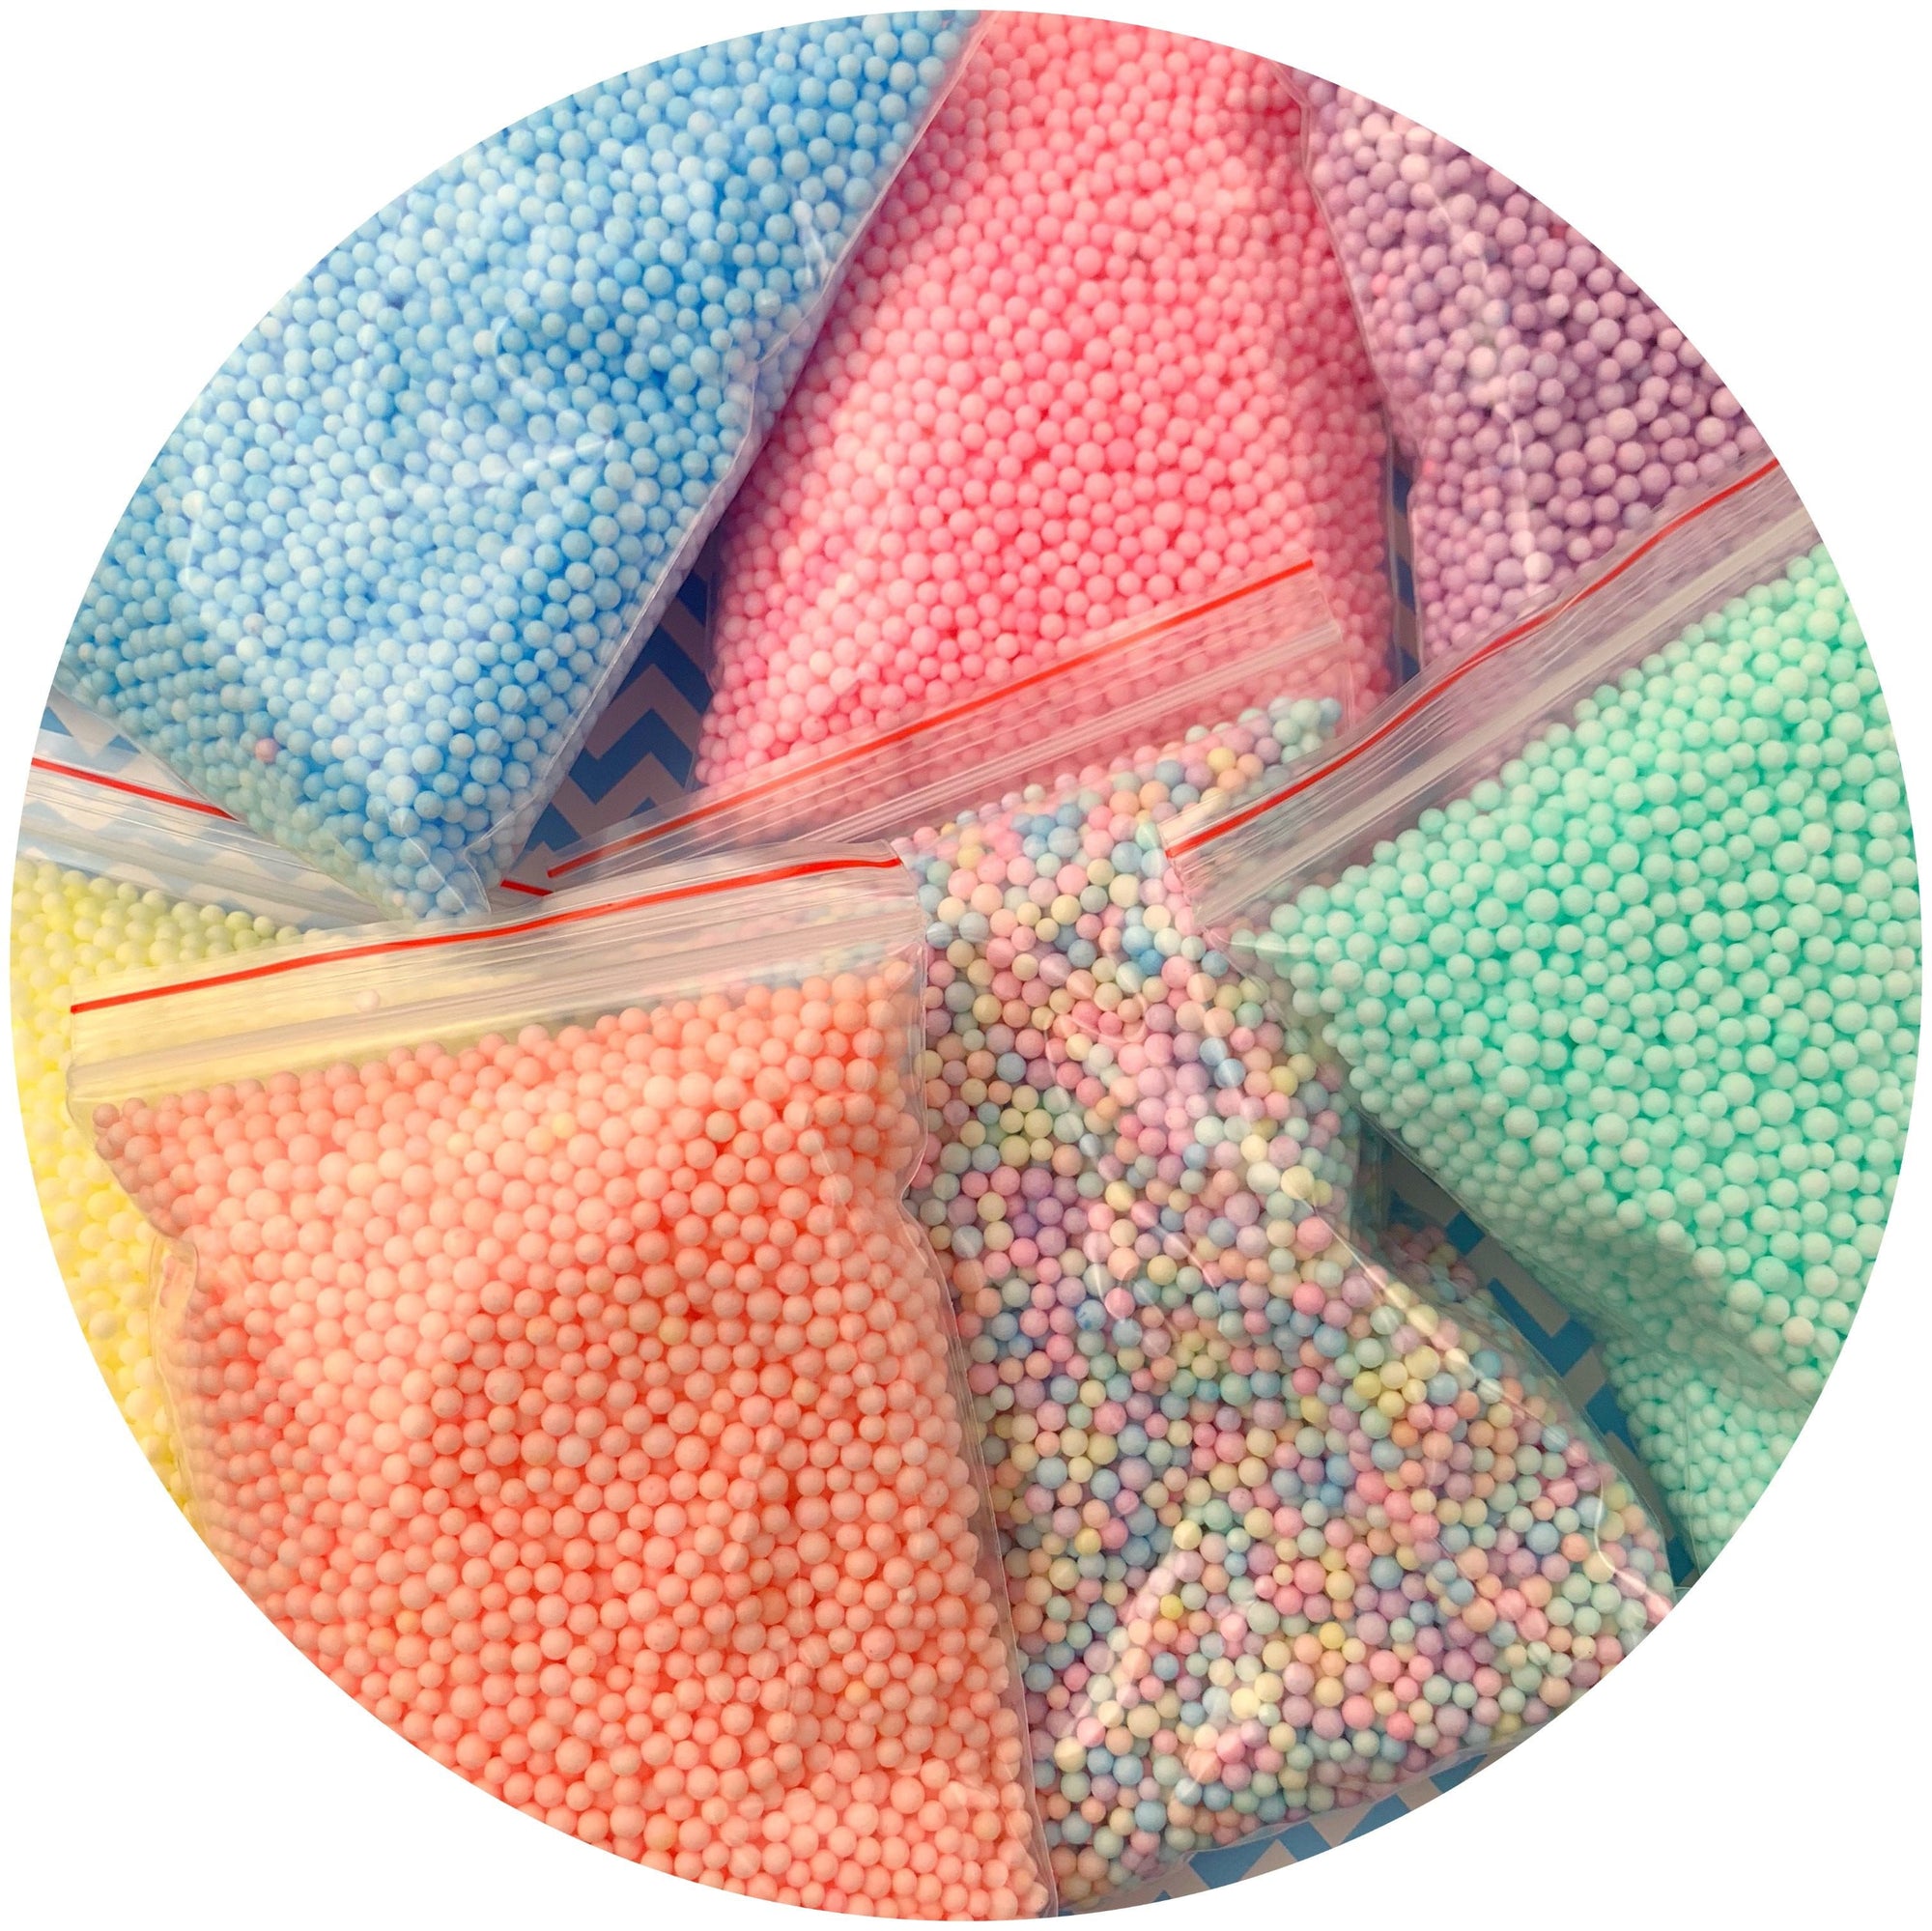 90,000-Piece Micro Foam Beads for Slime Making, Arts and Crafts, Assorted  Pastel Colors, Pack - Fred Meyer